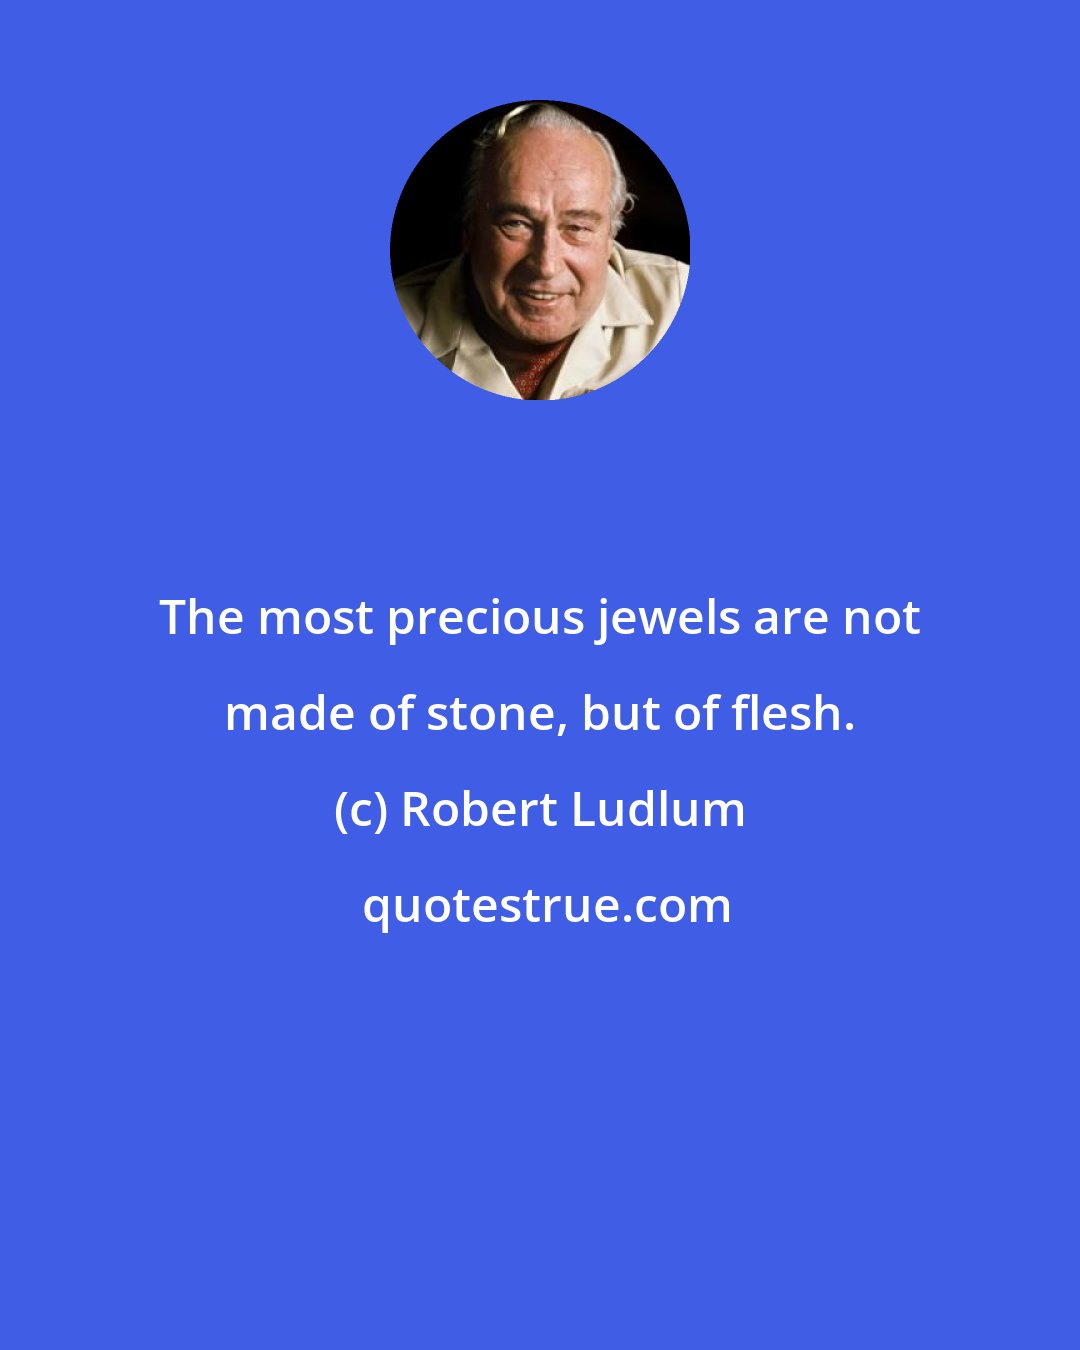 Robert Ludlum: The most precious jewels are not made of stone, but of flesh.